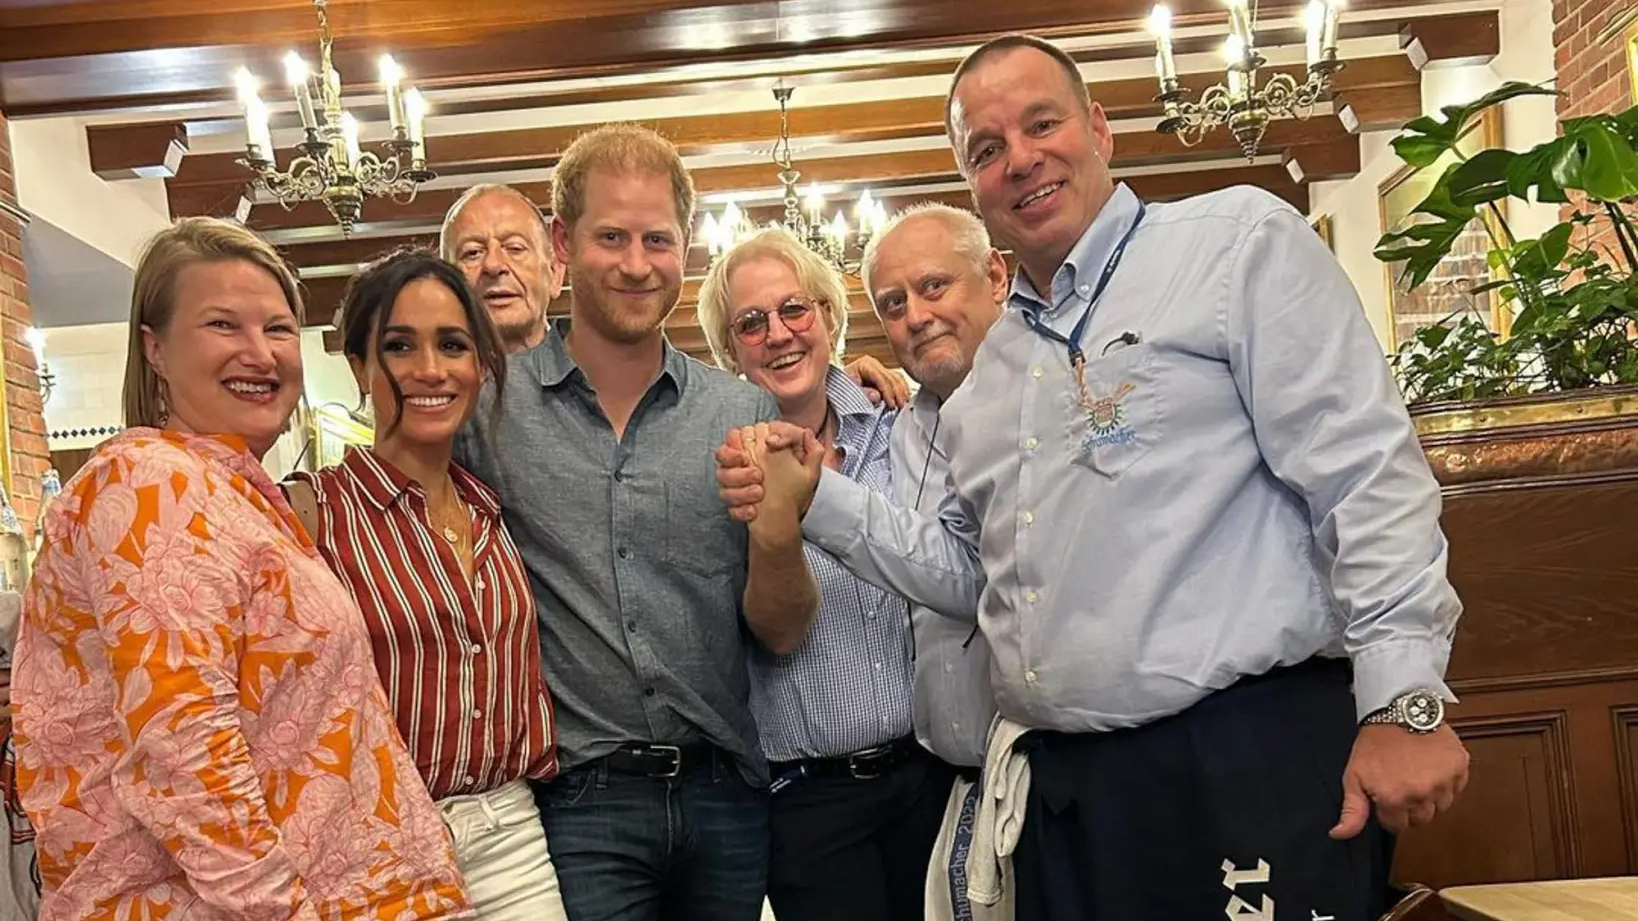 This is the brewery where Prince Harry celebrated his birthday